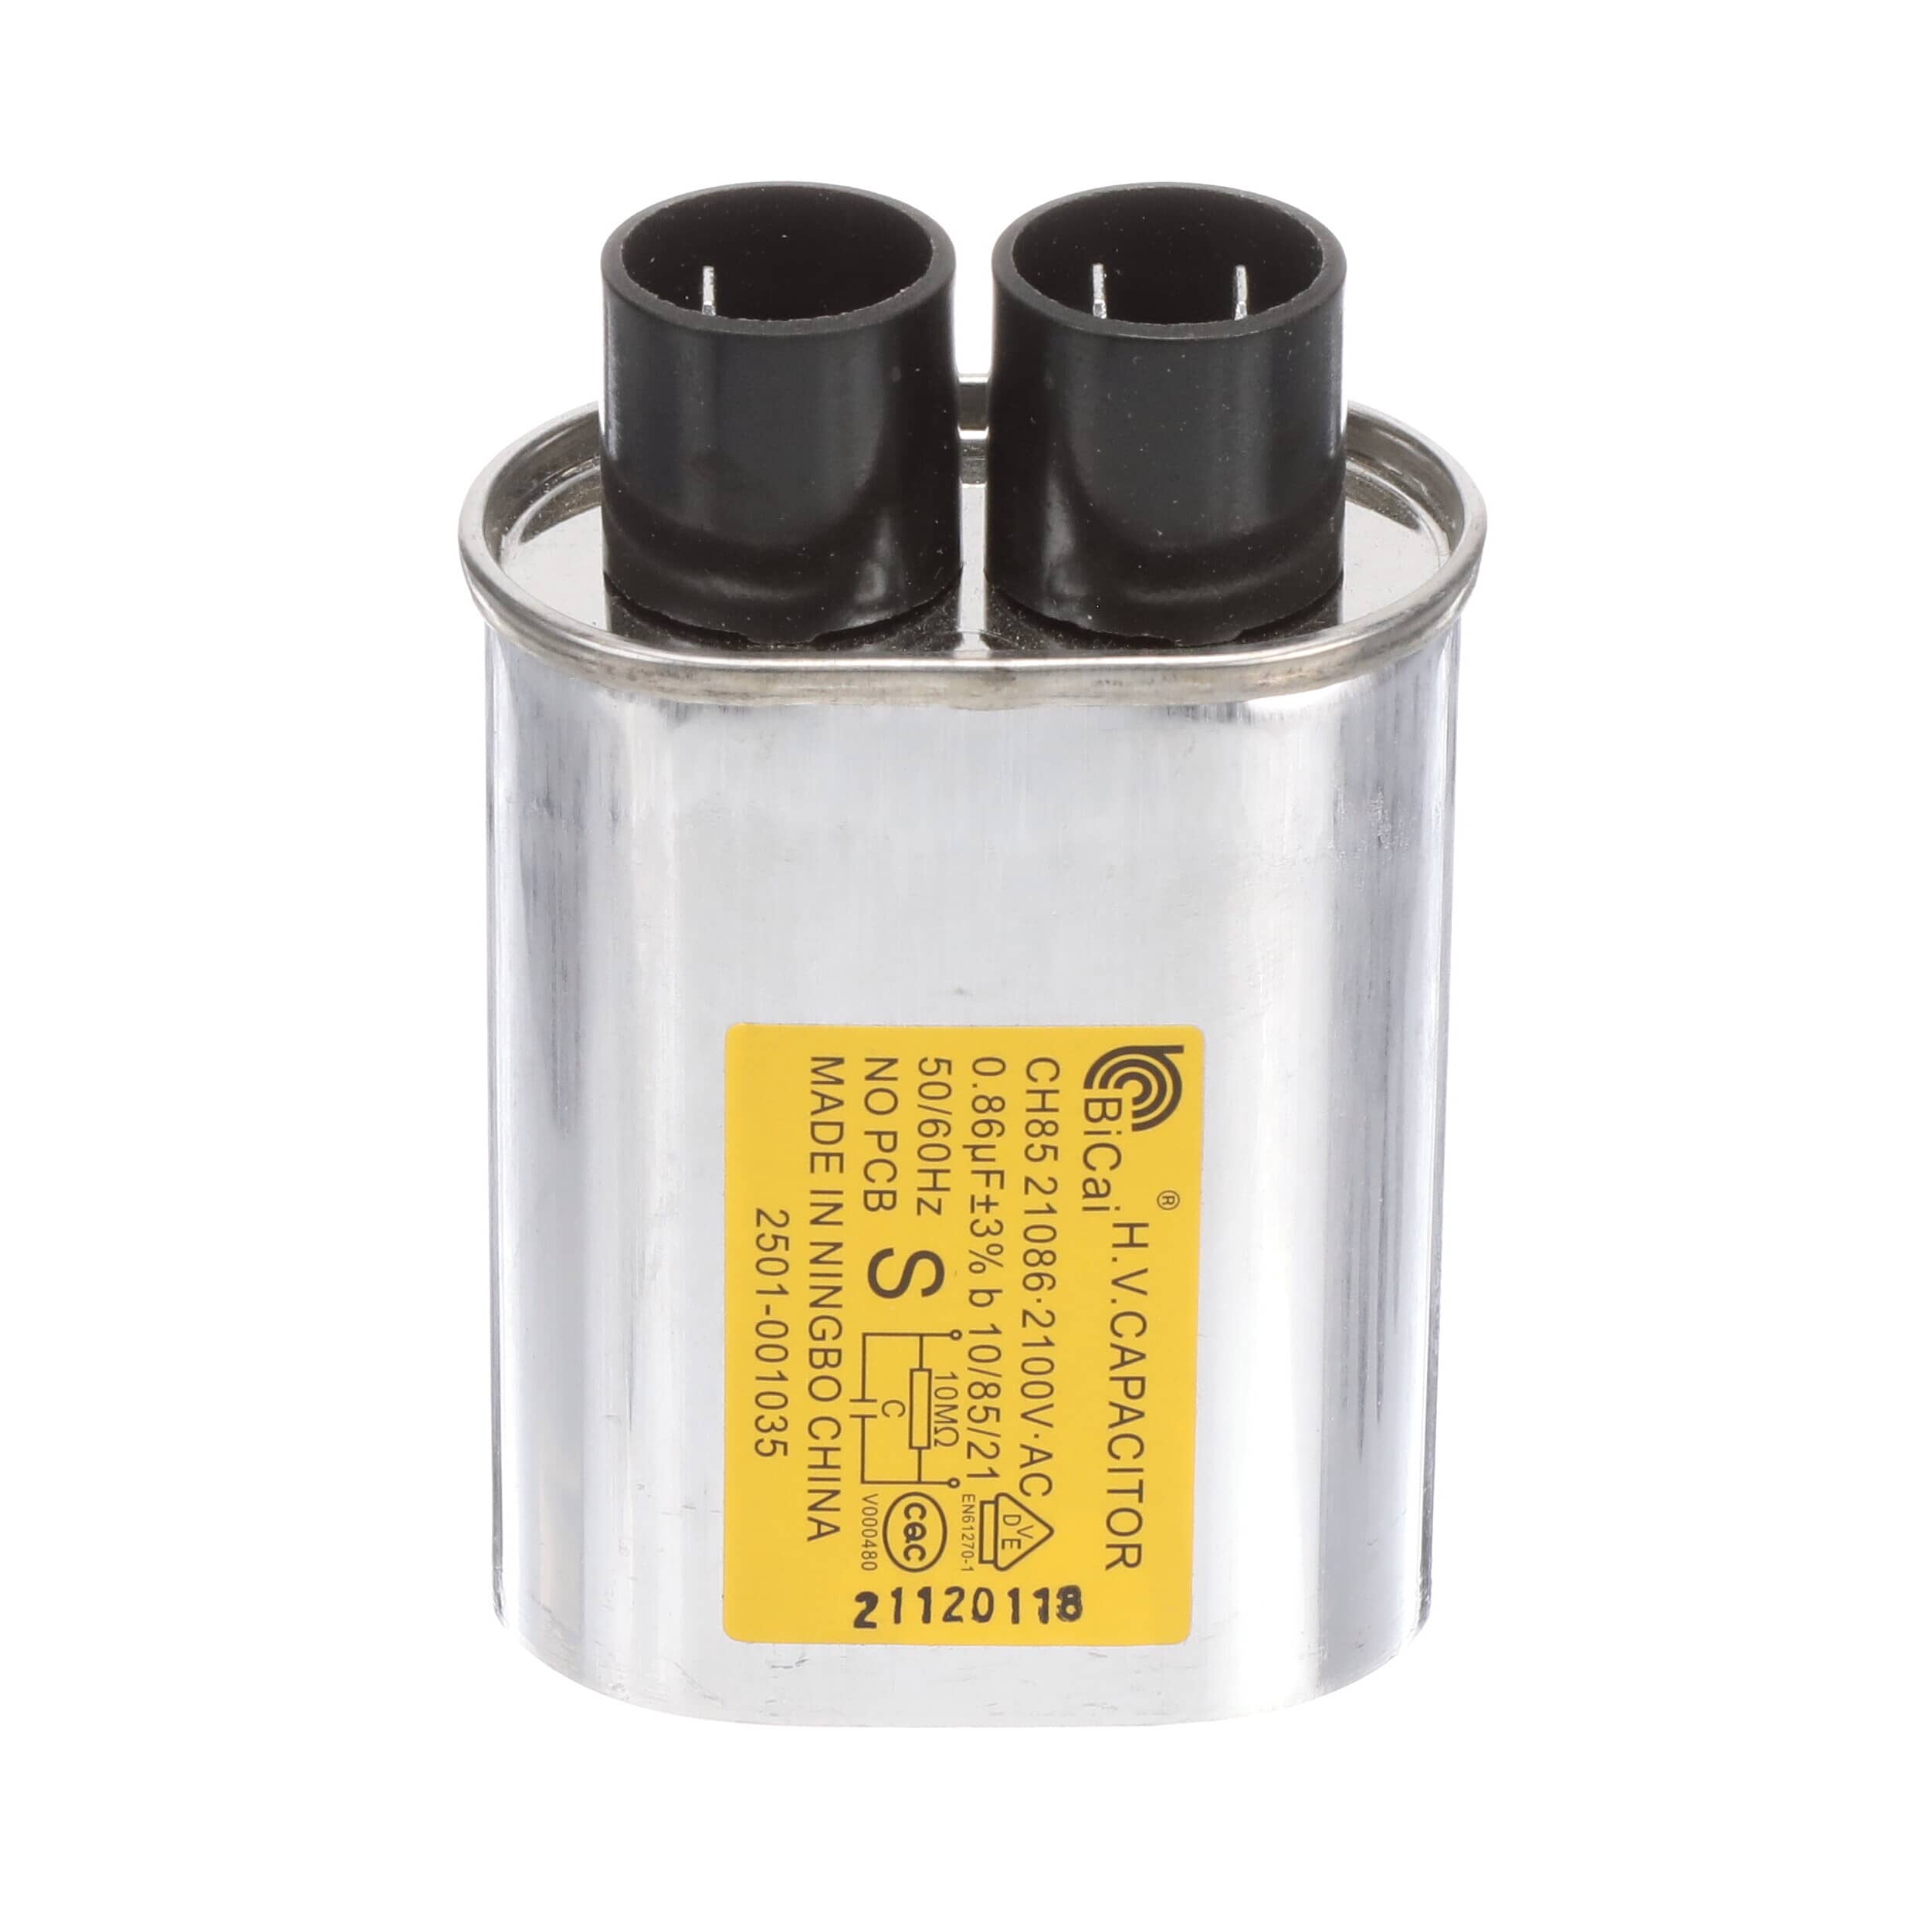 2501-001035 Microwave High-Voltage Capacitor